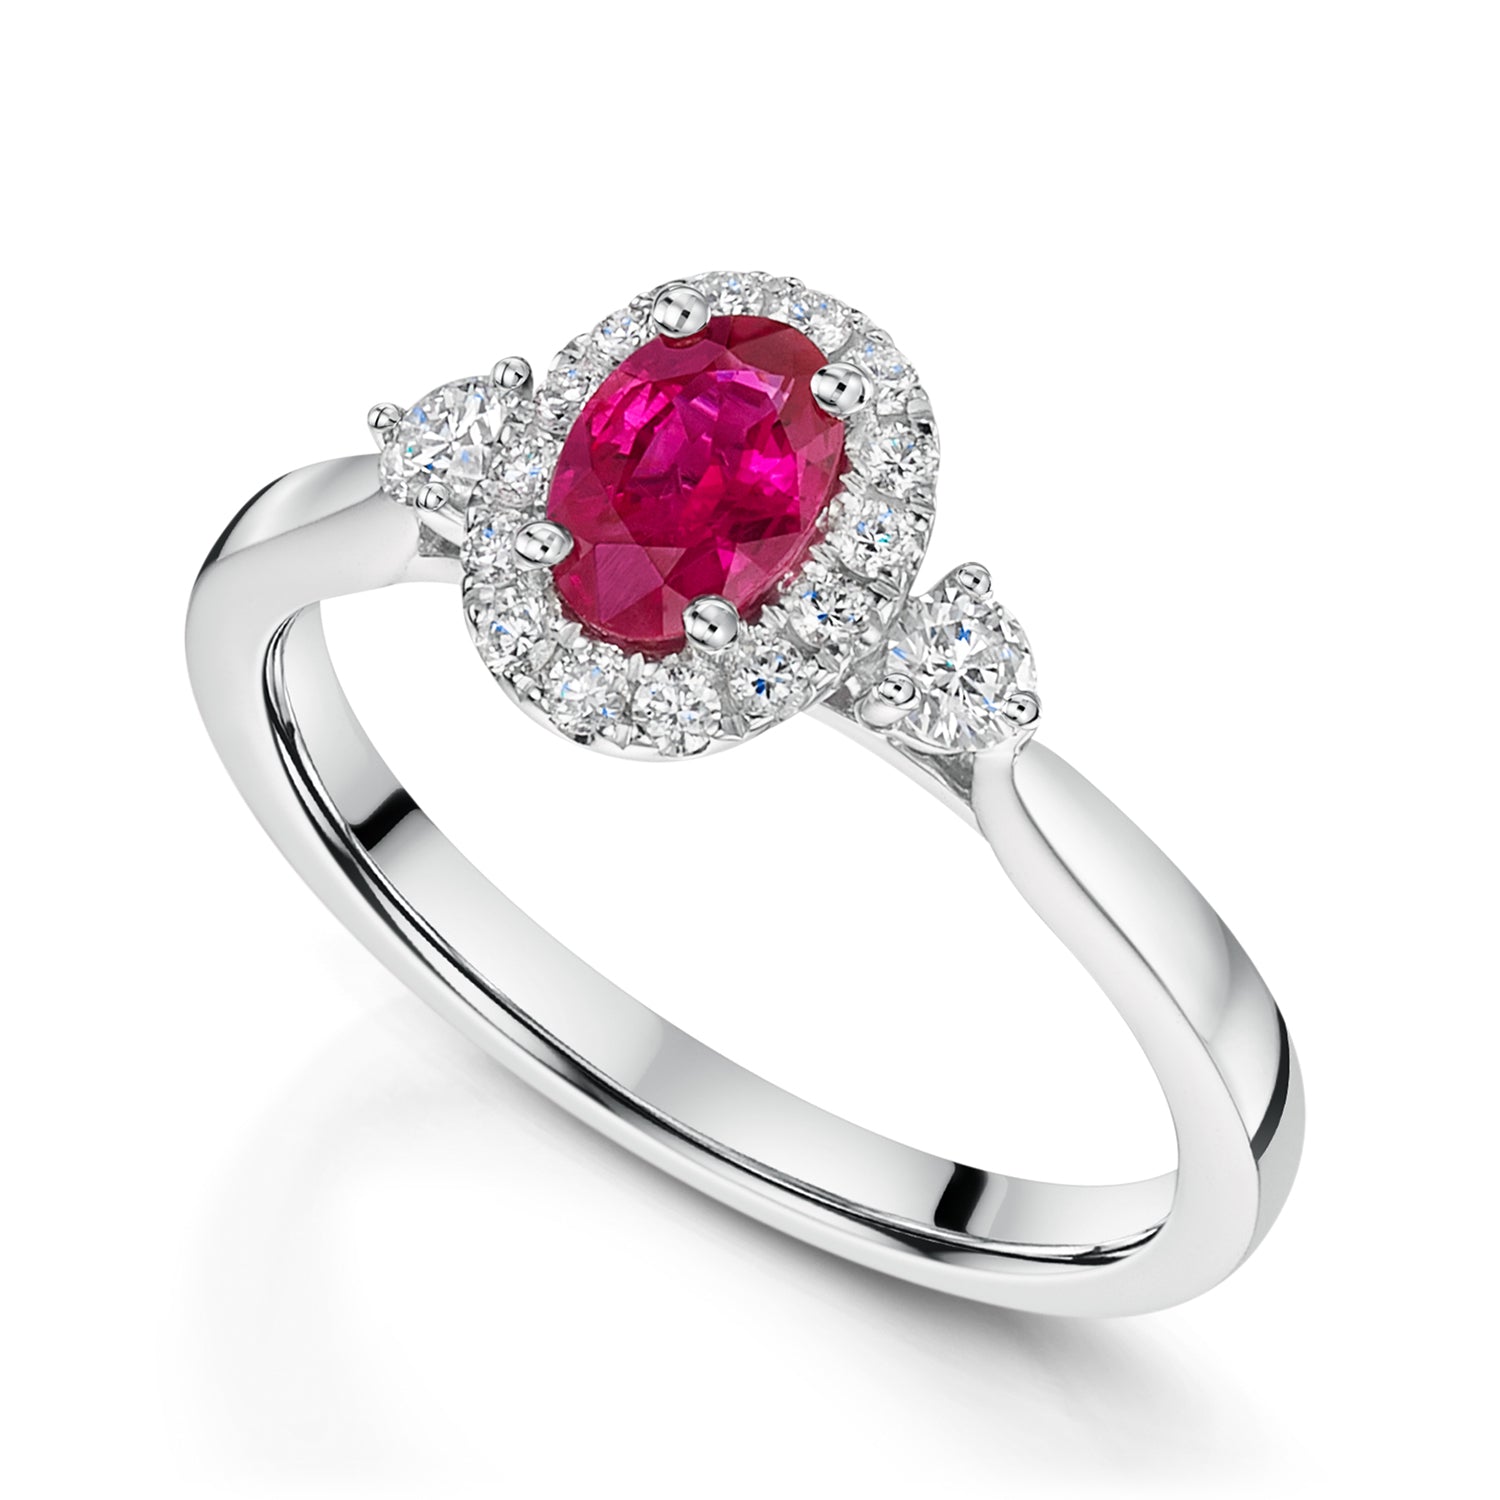 Platinum Oval Ruby And Diamond Cluster Ring With A Diamond On Each Shoulder,